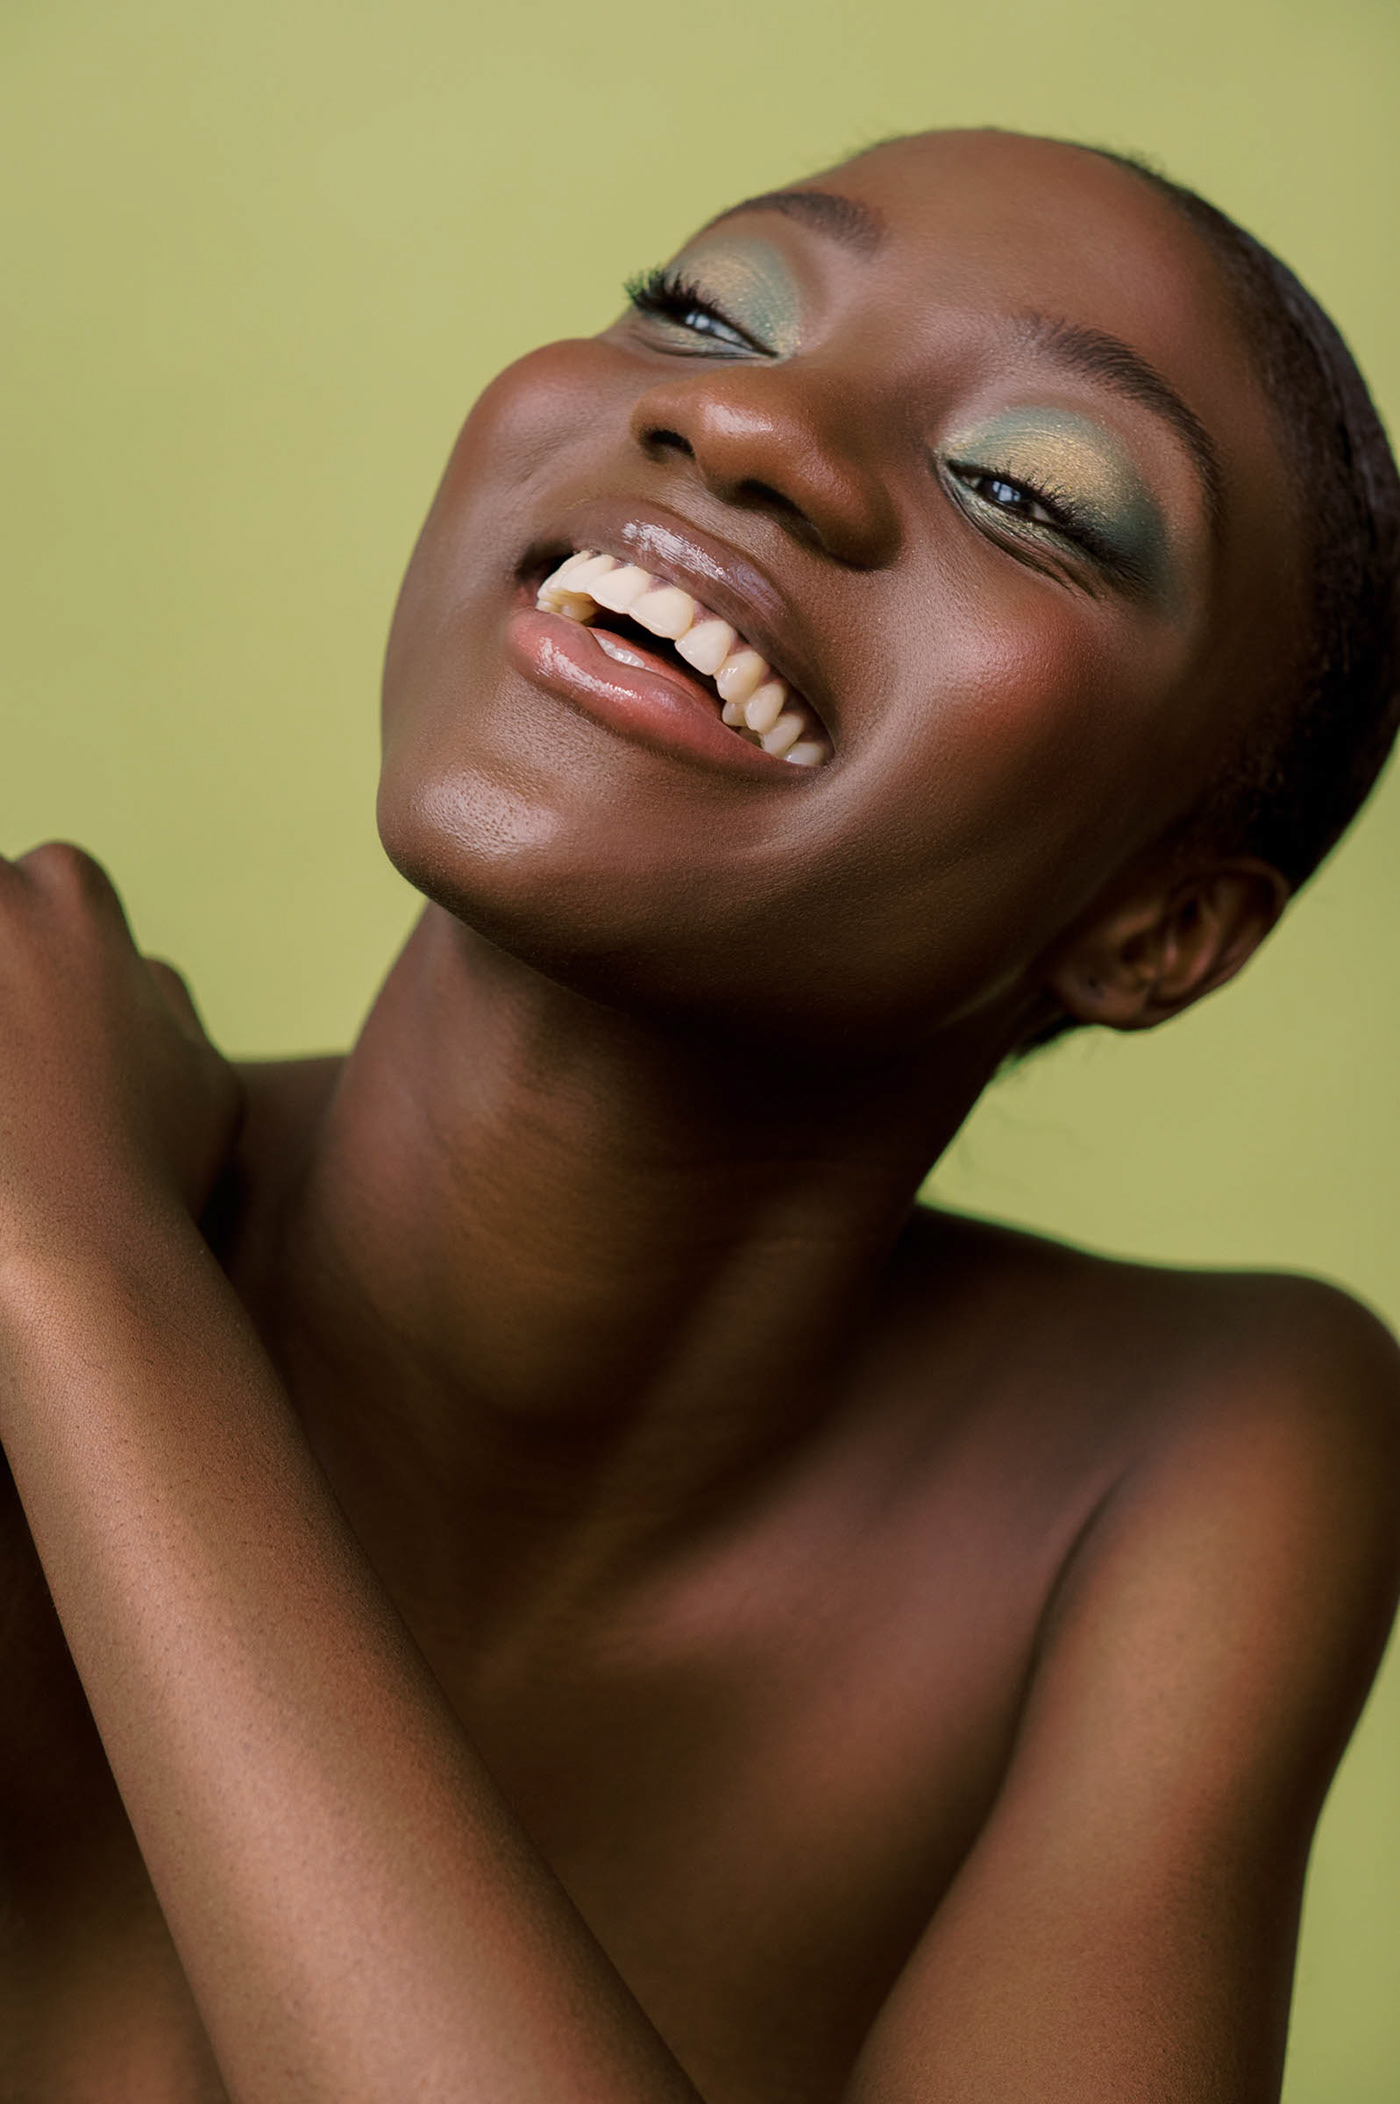 Shimmery eye-make up looks in different tones are the main focus of this beauty editorial.